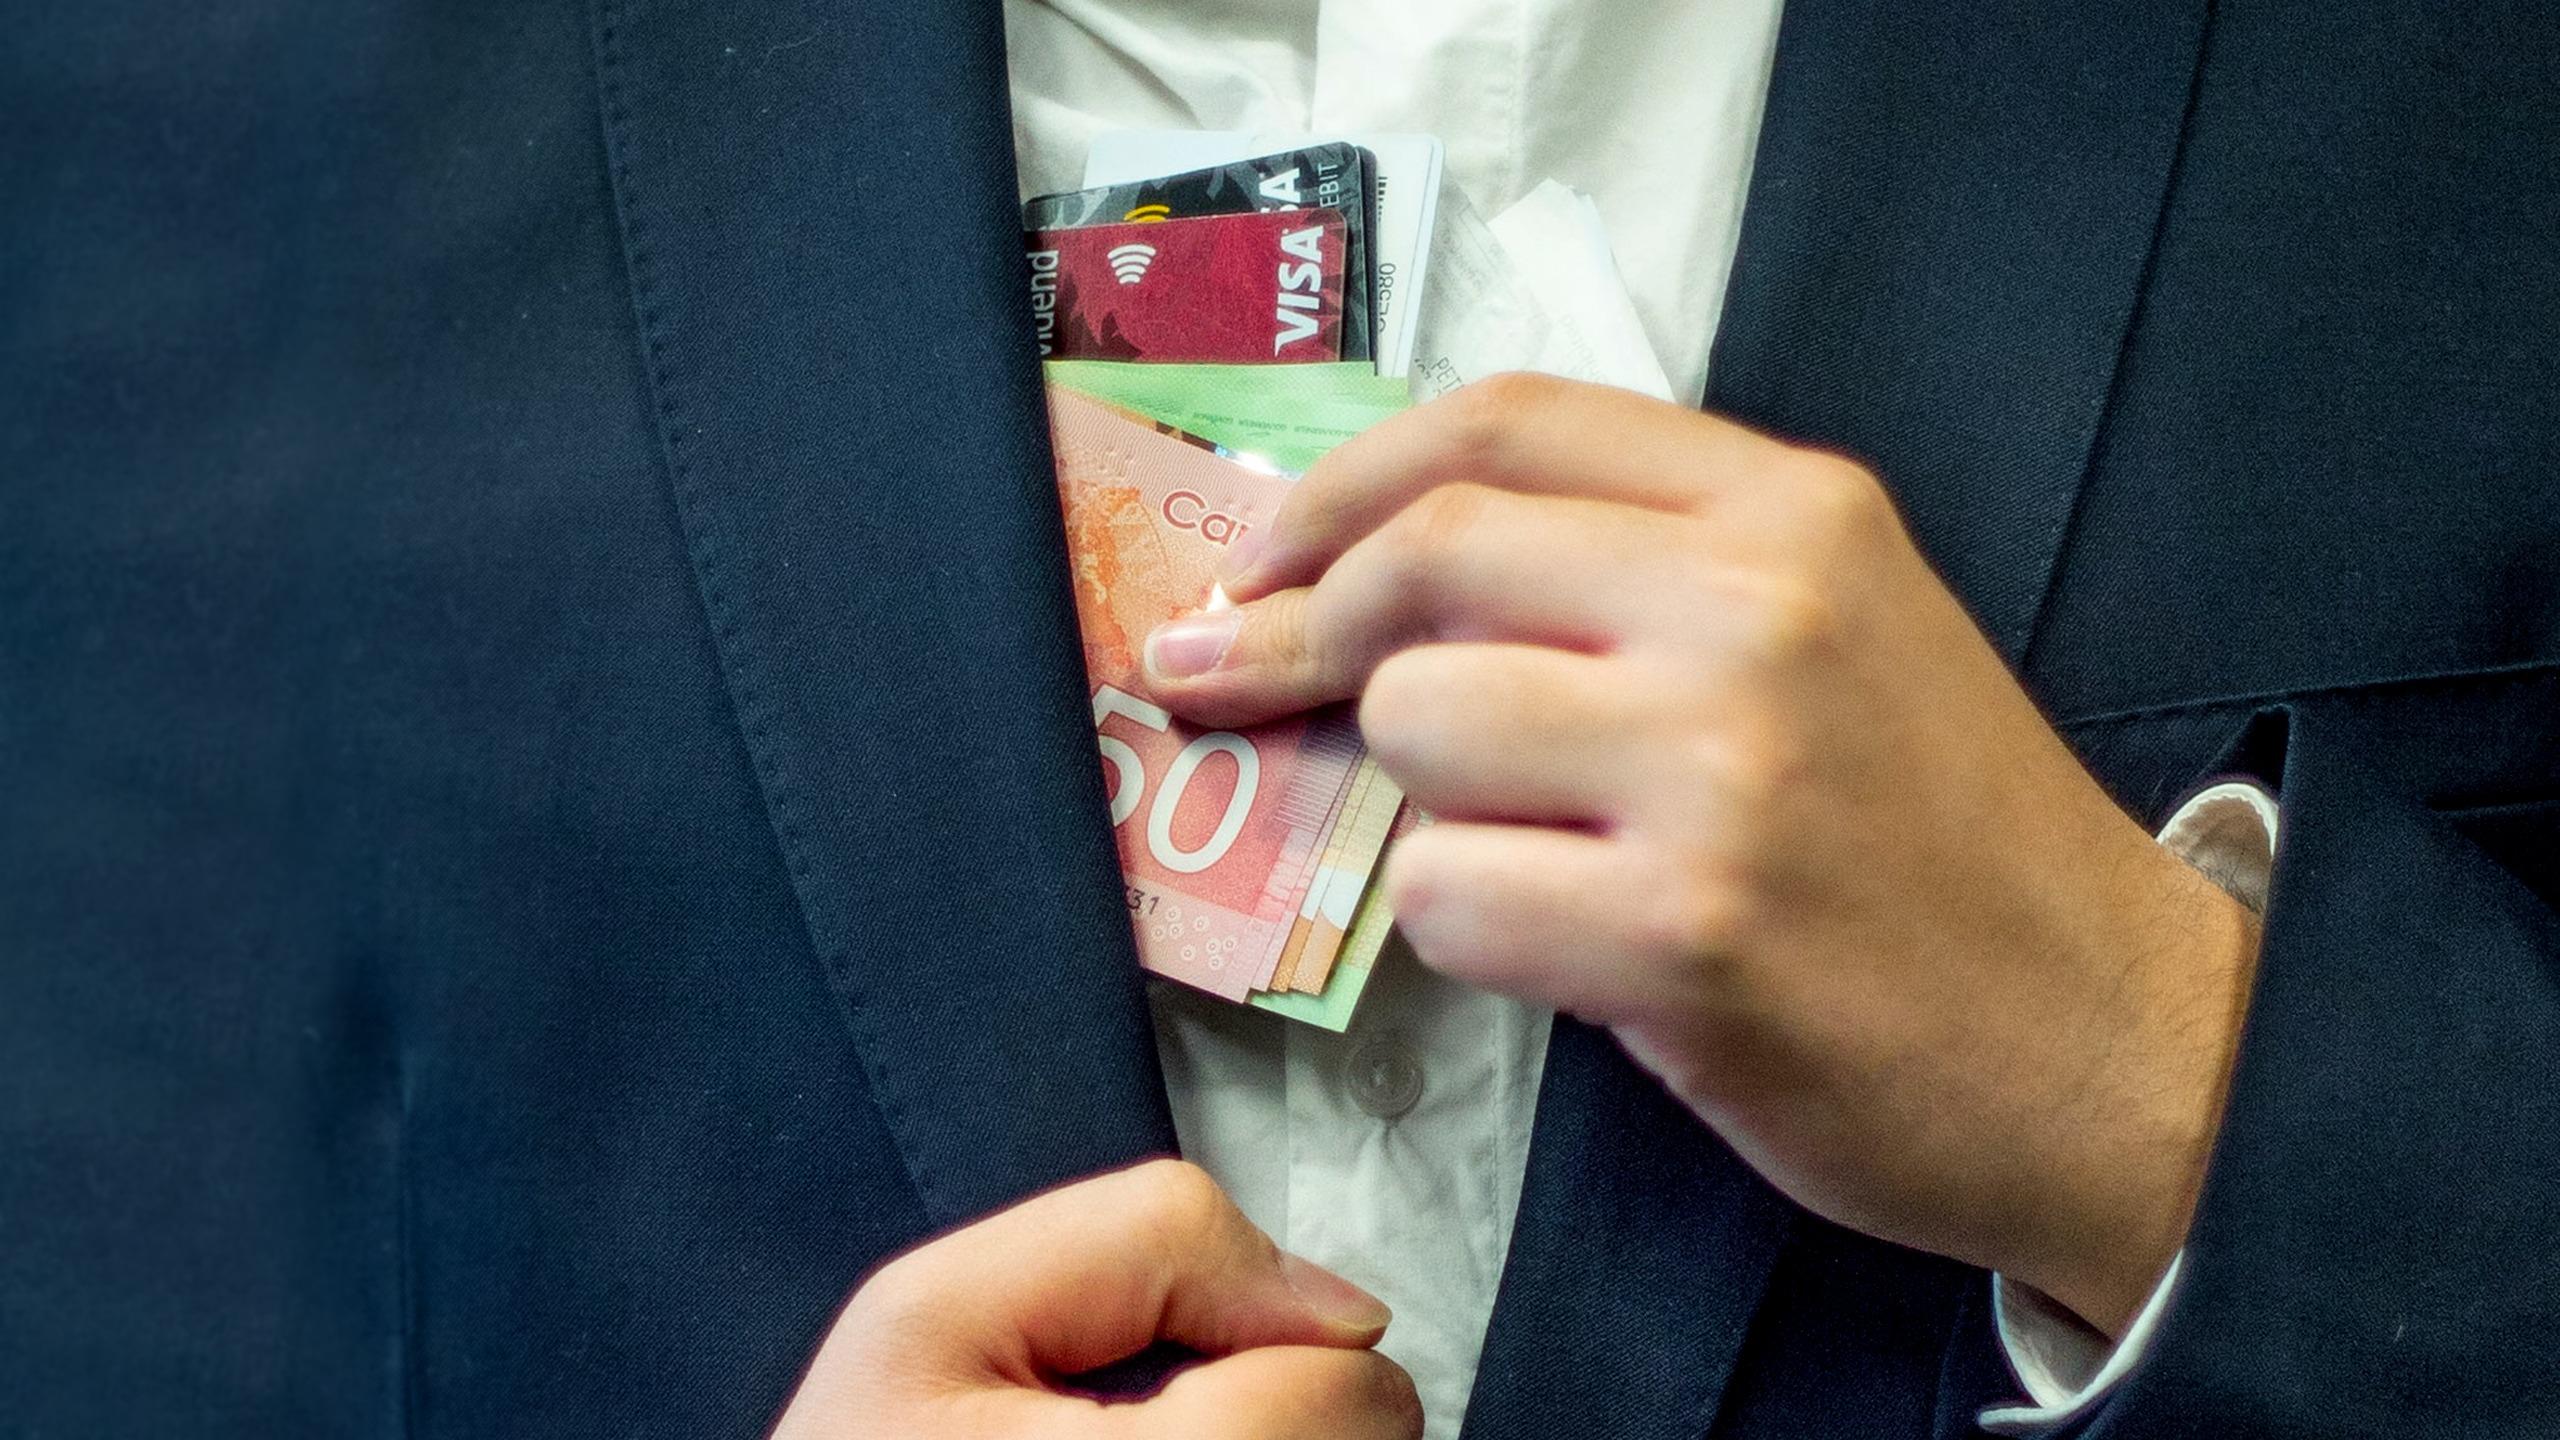 A man in a suit pockets credit cards and money.